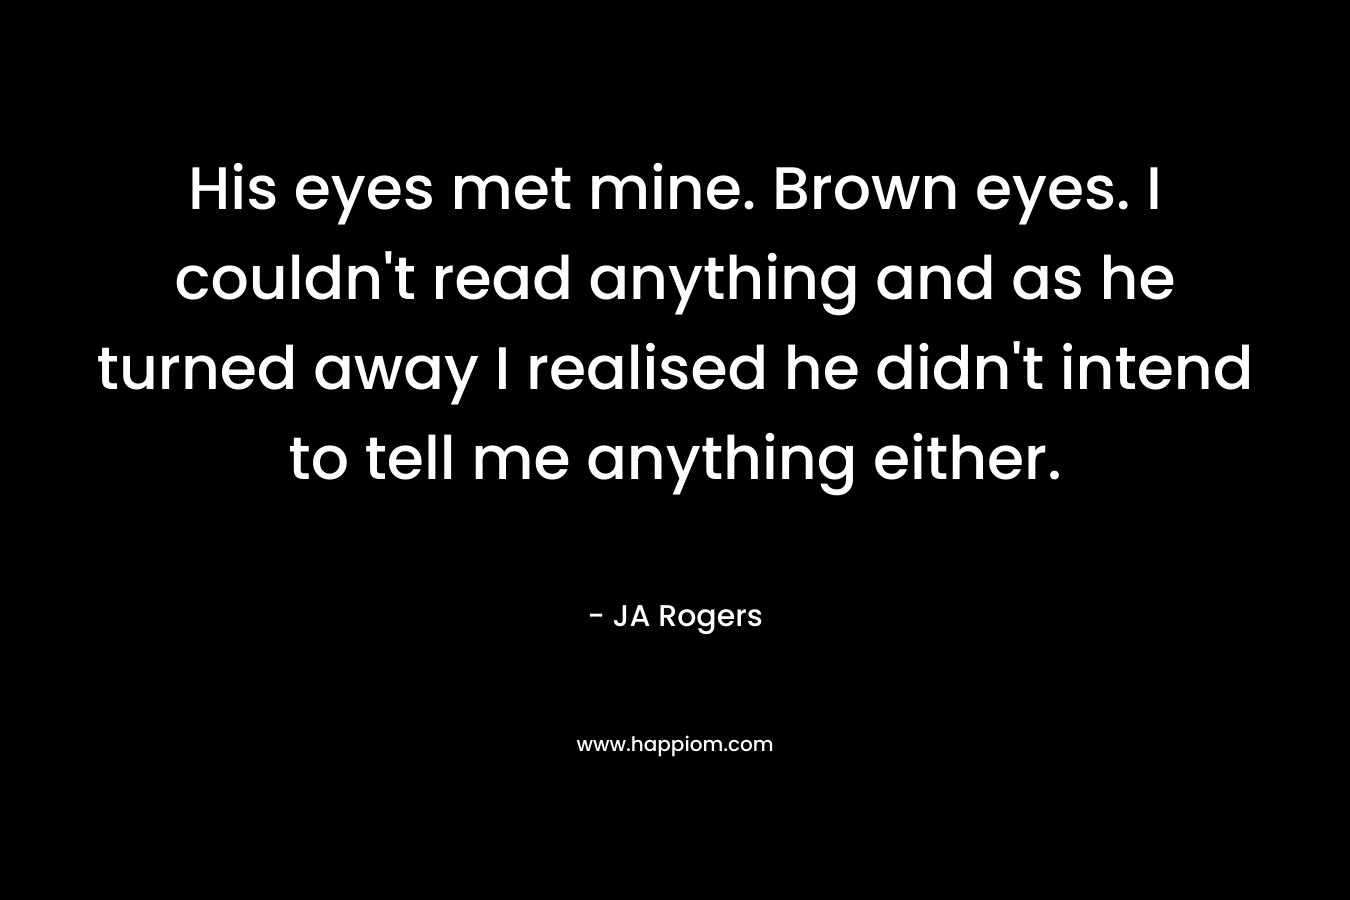 His eyes met mine. Brown eyes. I couldn't read anything and as he turned away I realised he didn't intend to tell me anything either.